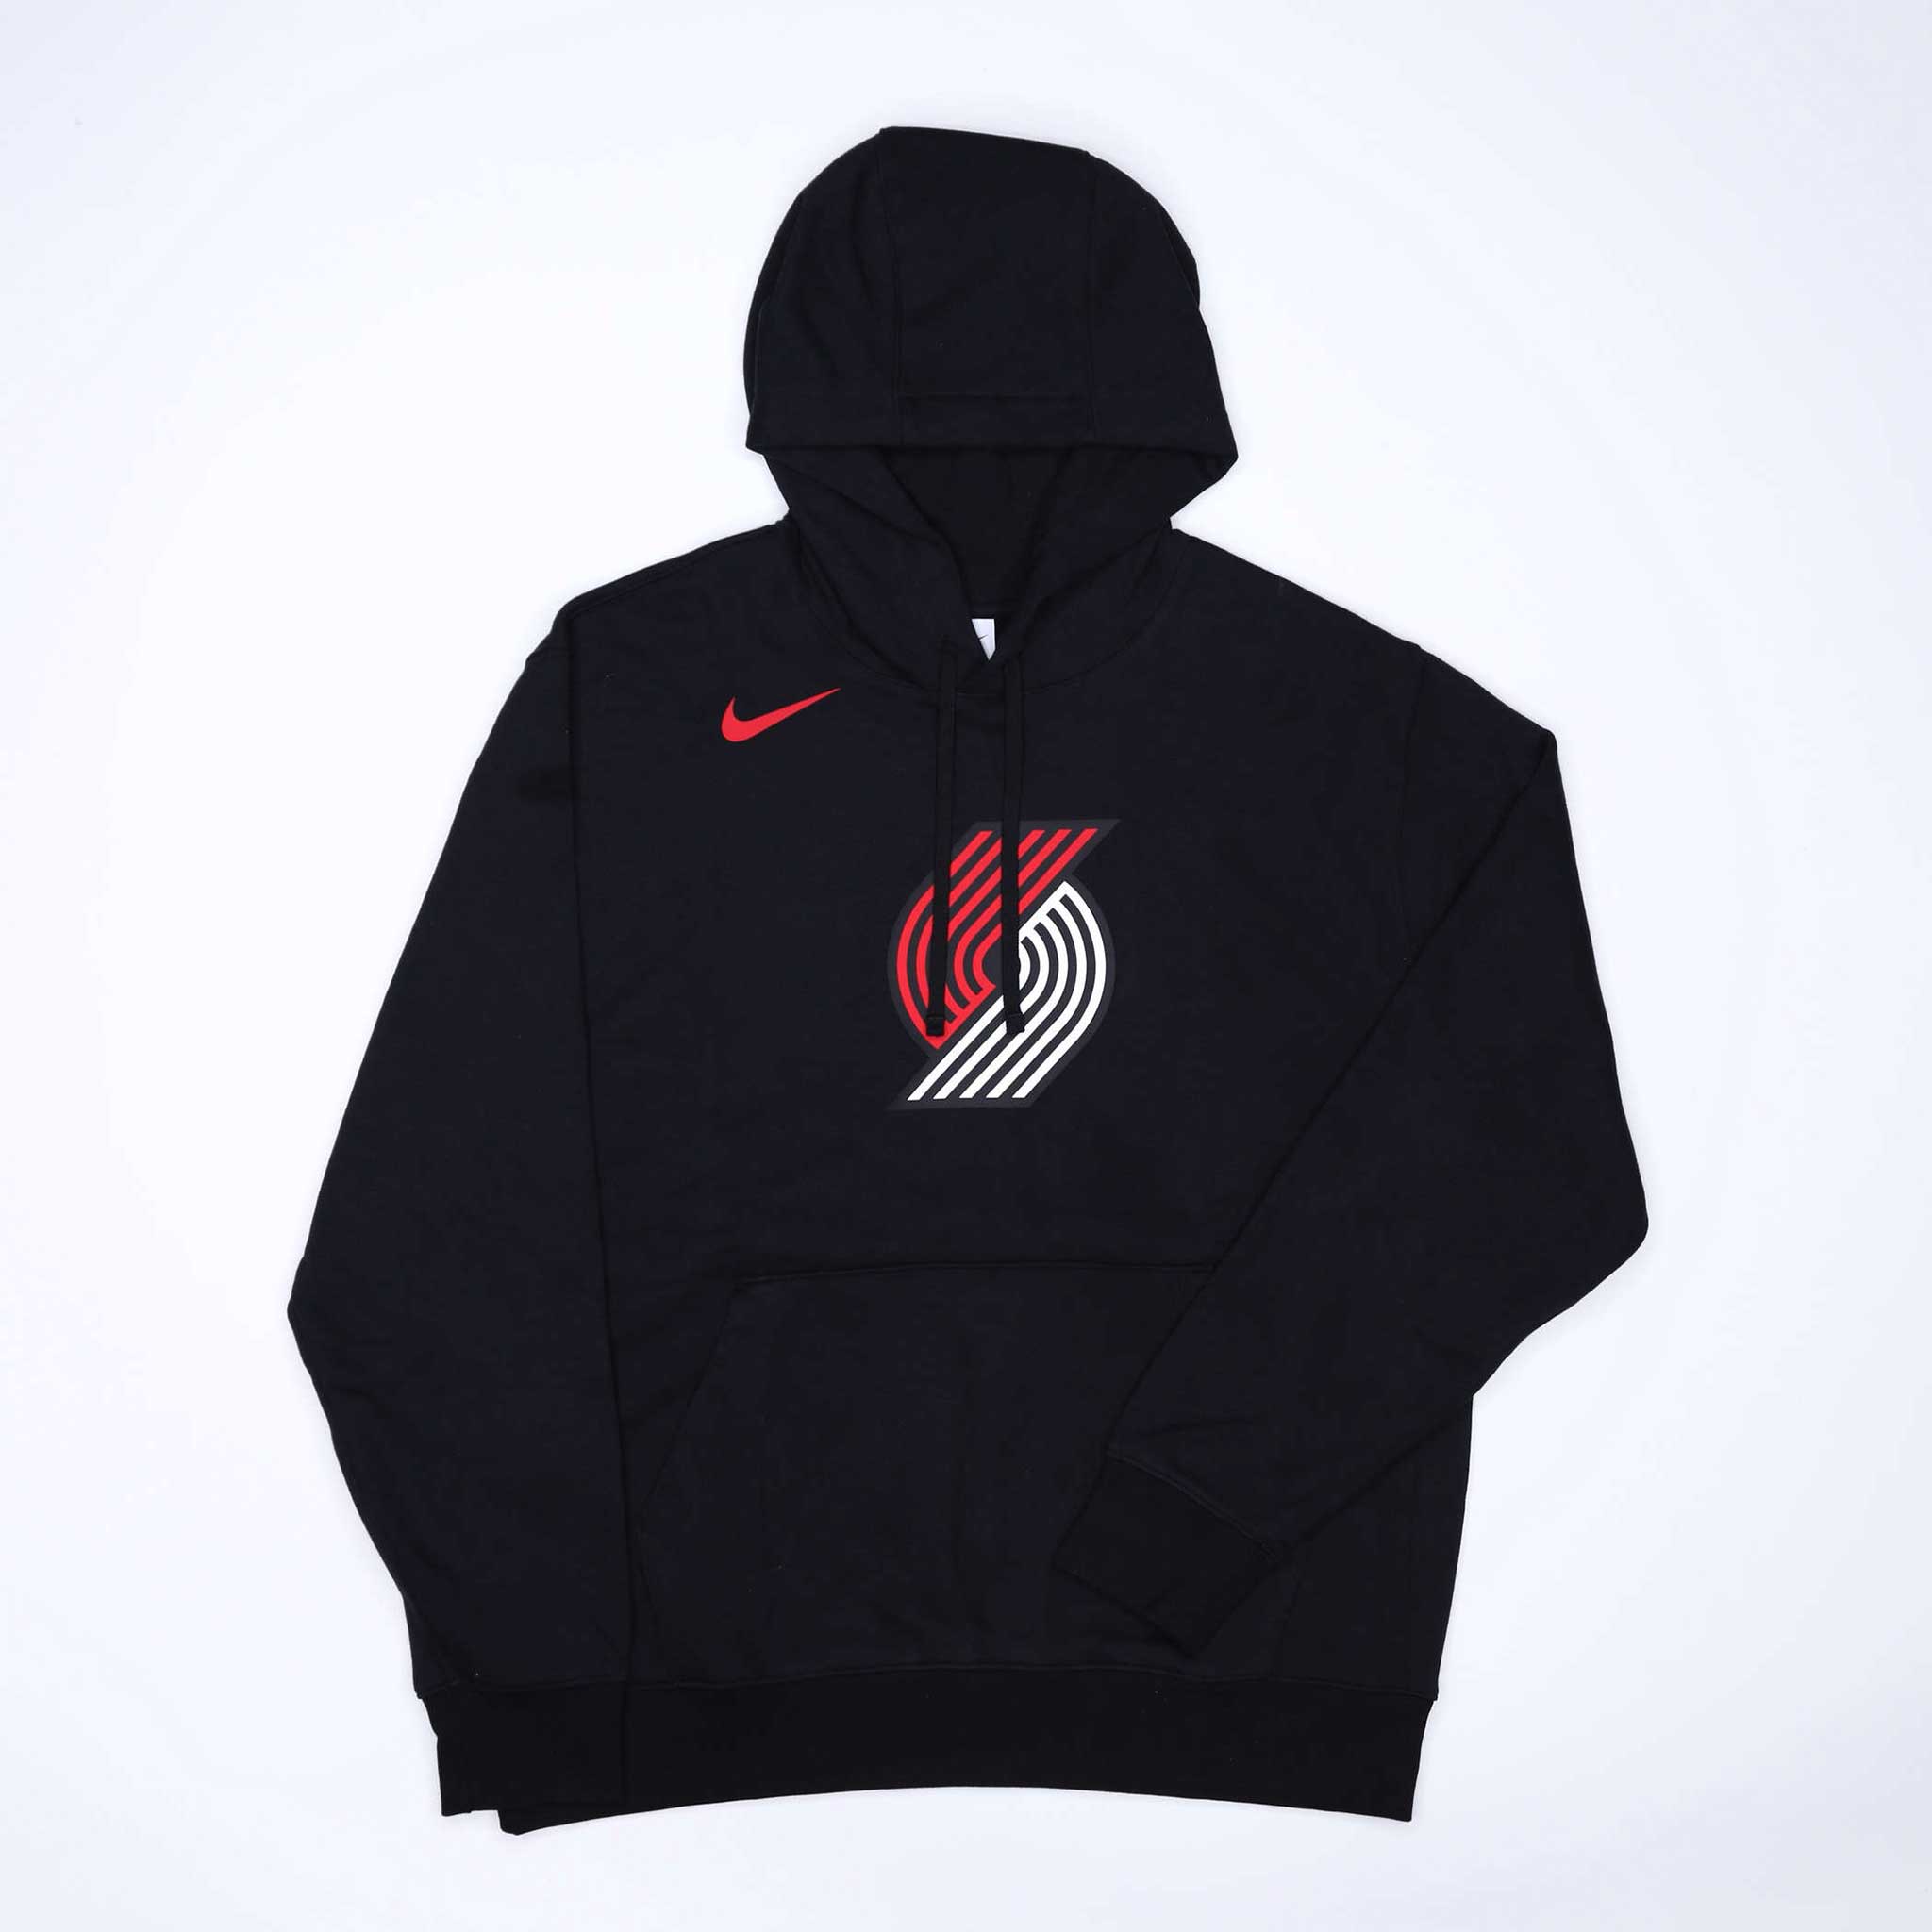 Portland Trail Blazers 'City' jerseys, more cream-colored fan gear now  available online, in stores 